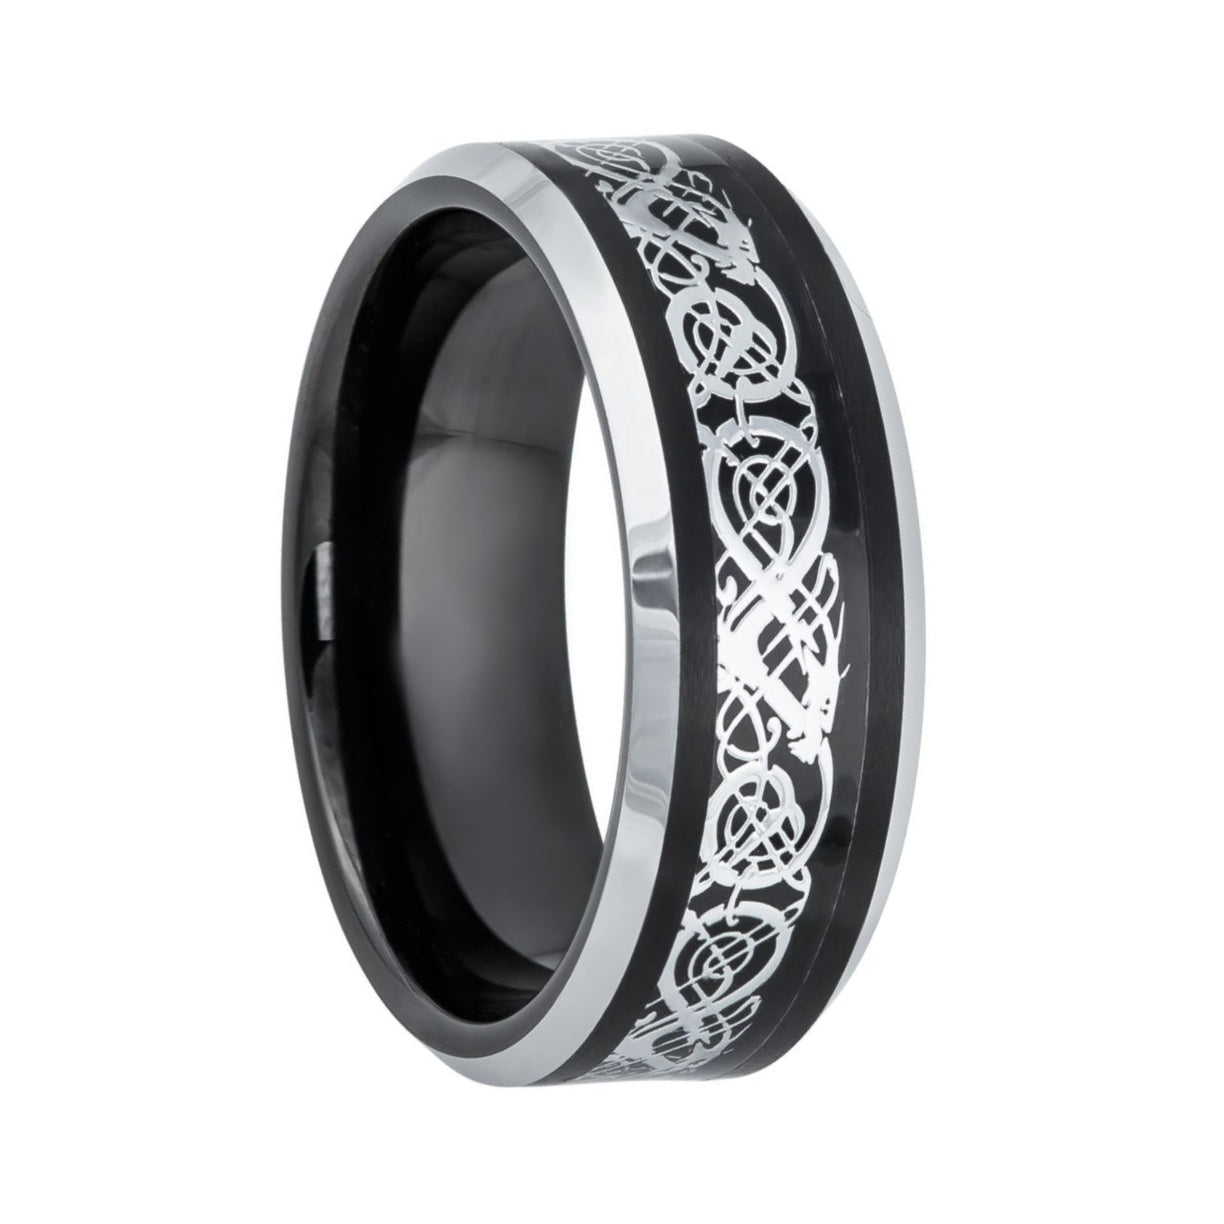 Black Tungsten Men's Wedding Band with Silver Celtic Dragon Inlay